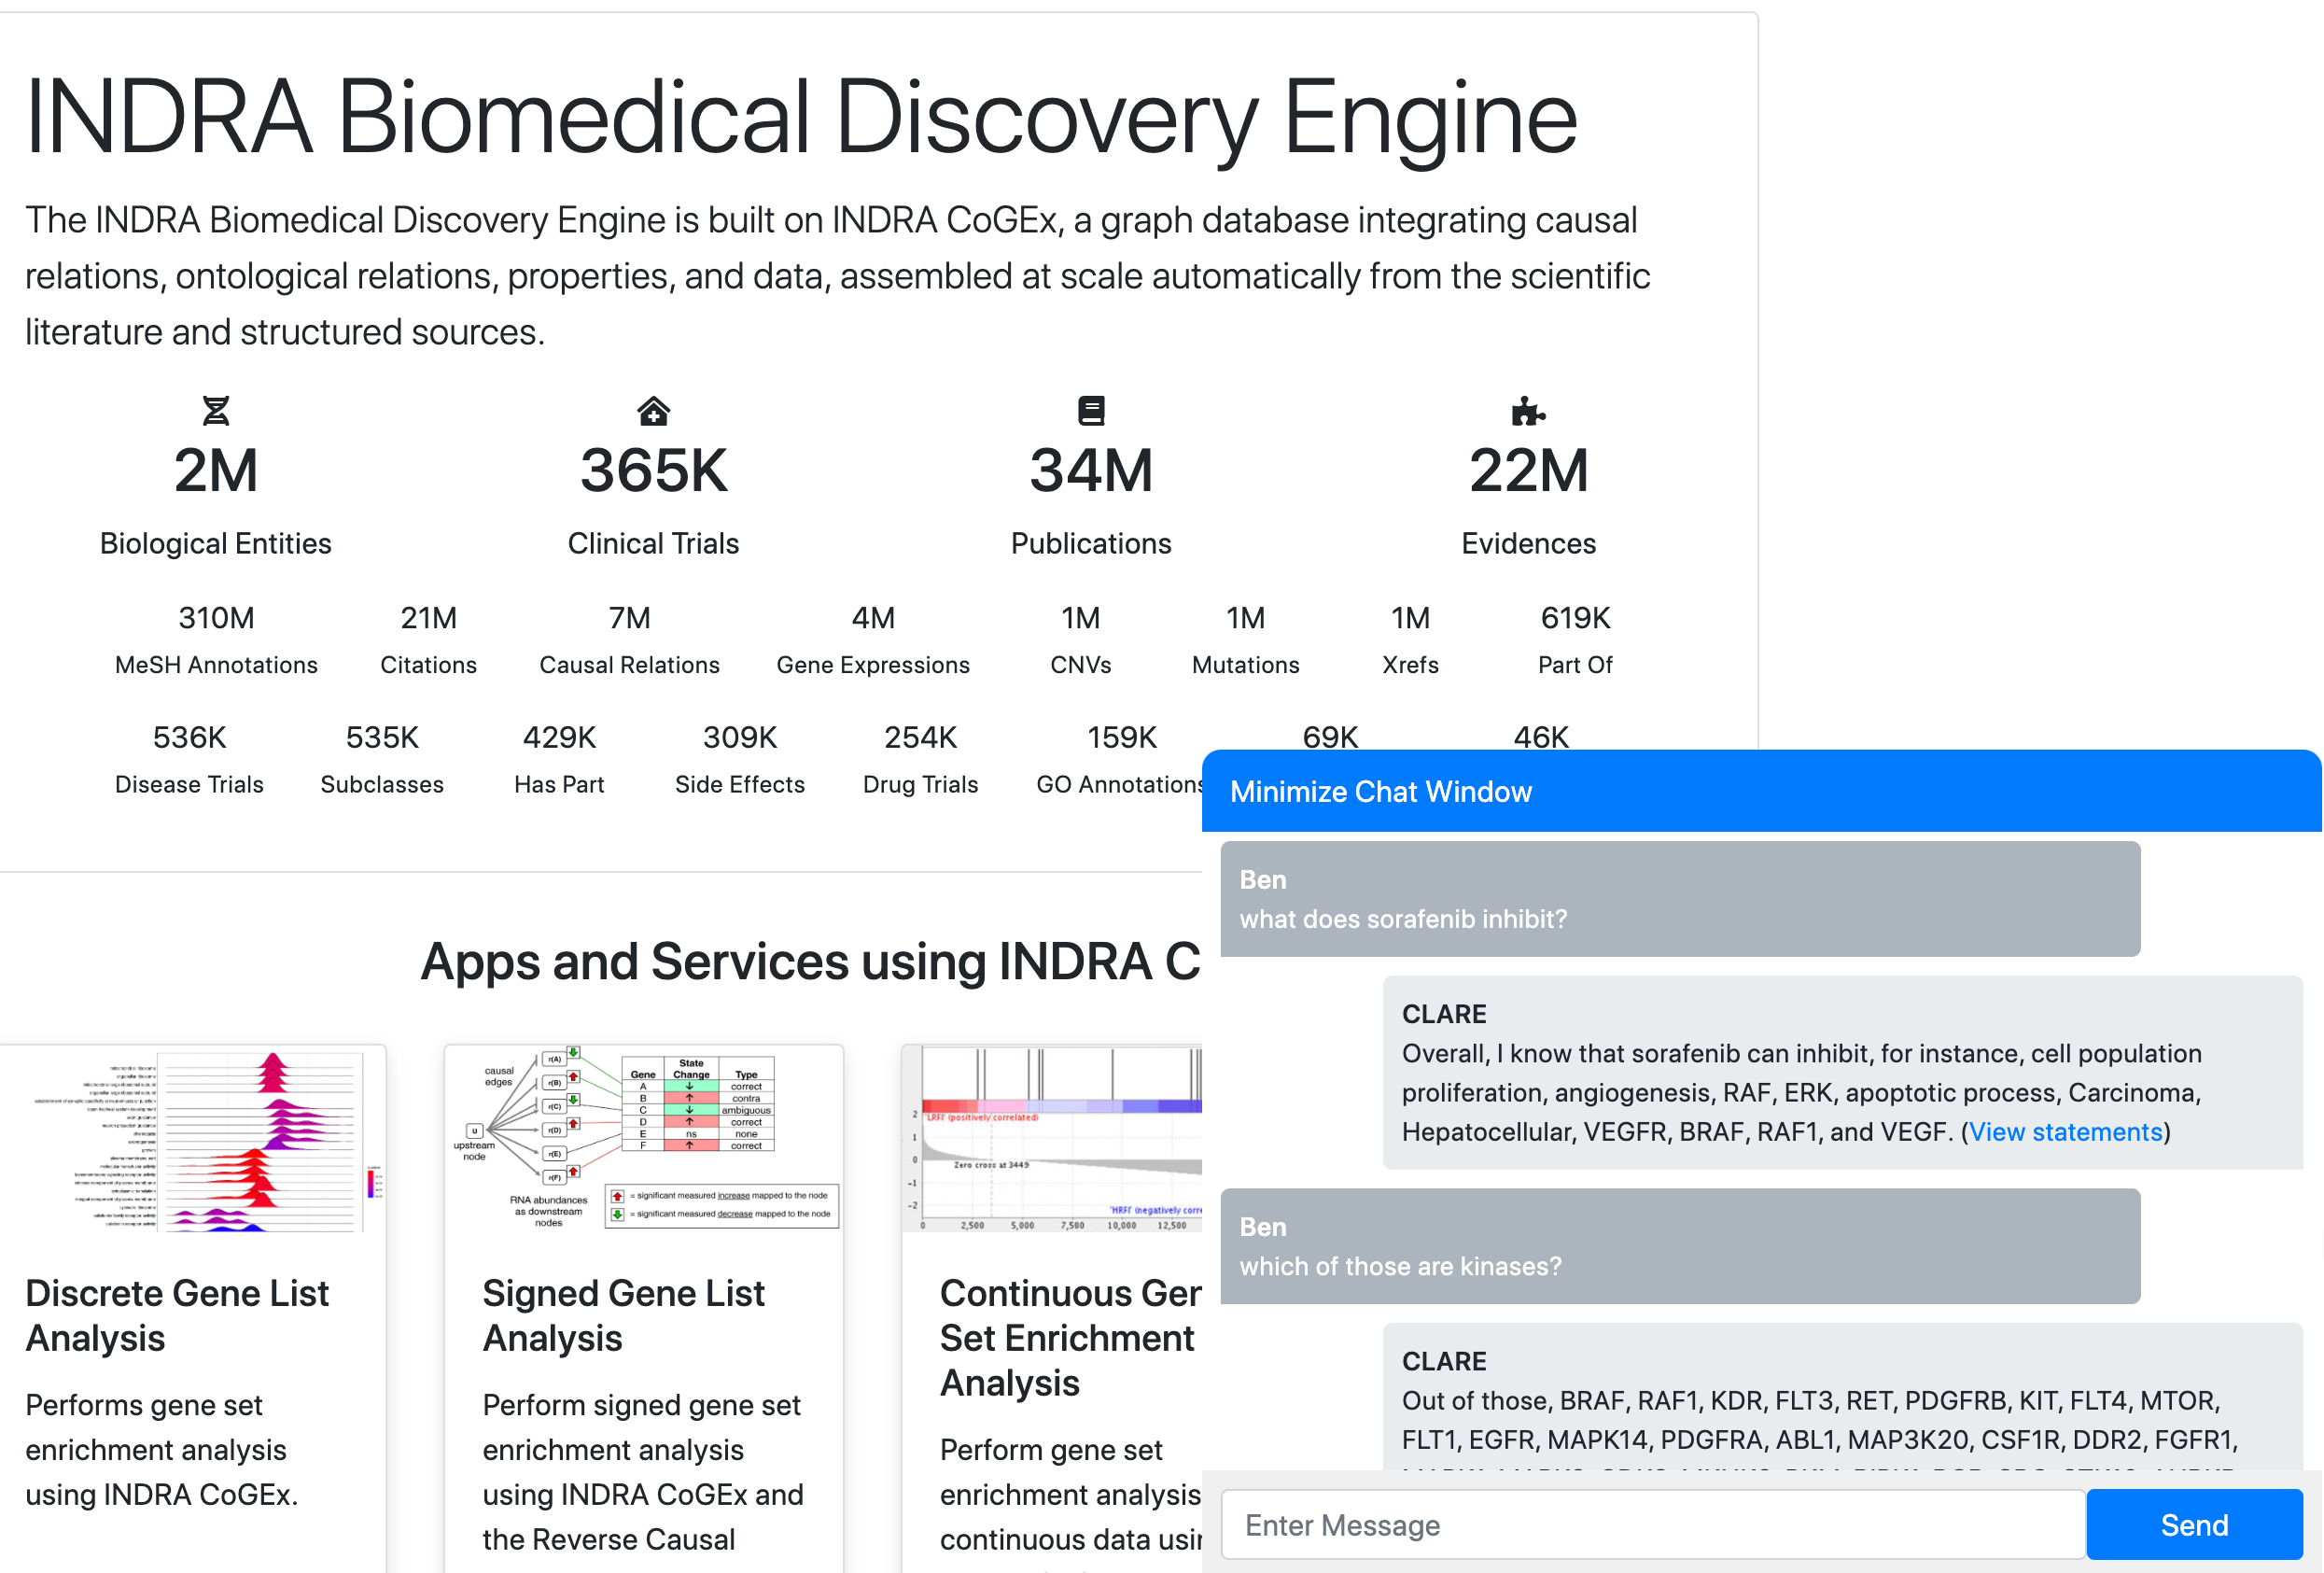 INDRA Biomedical Discovery Engine